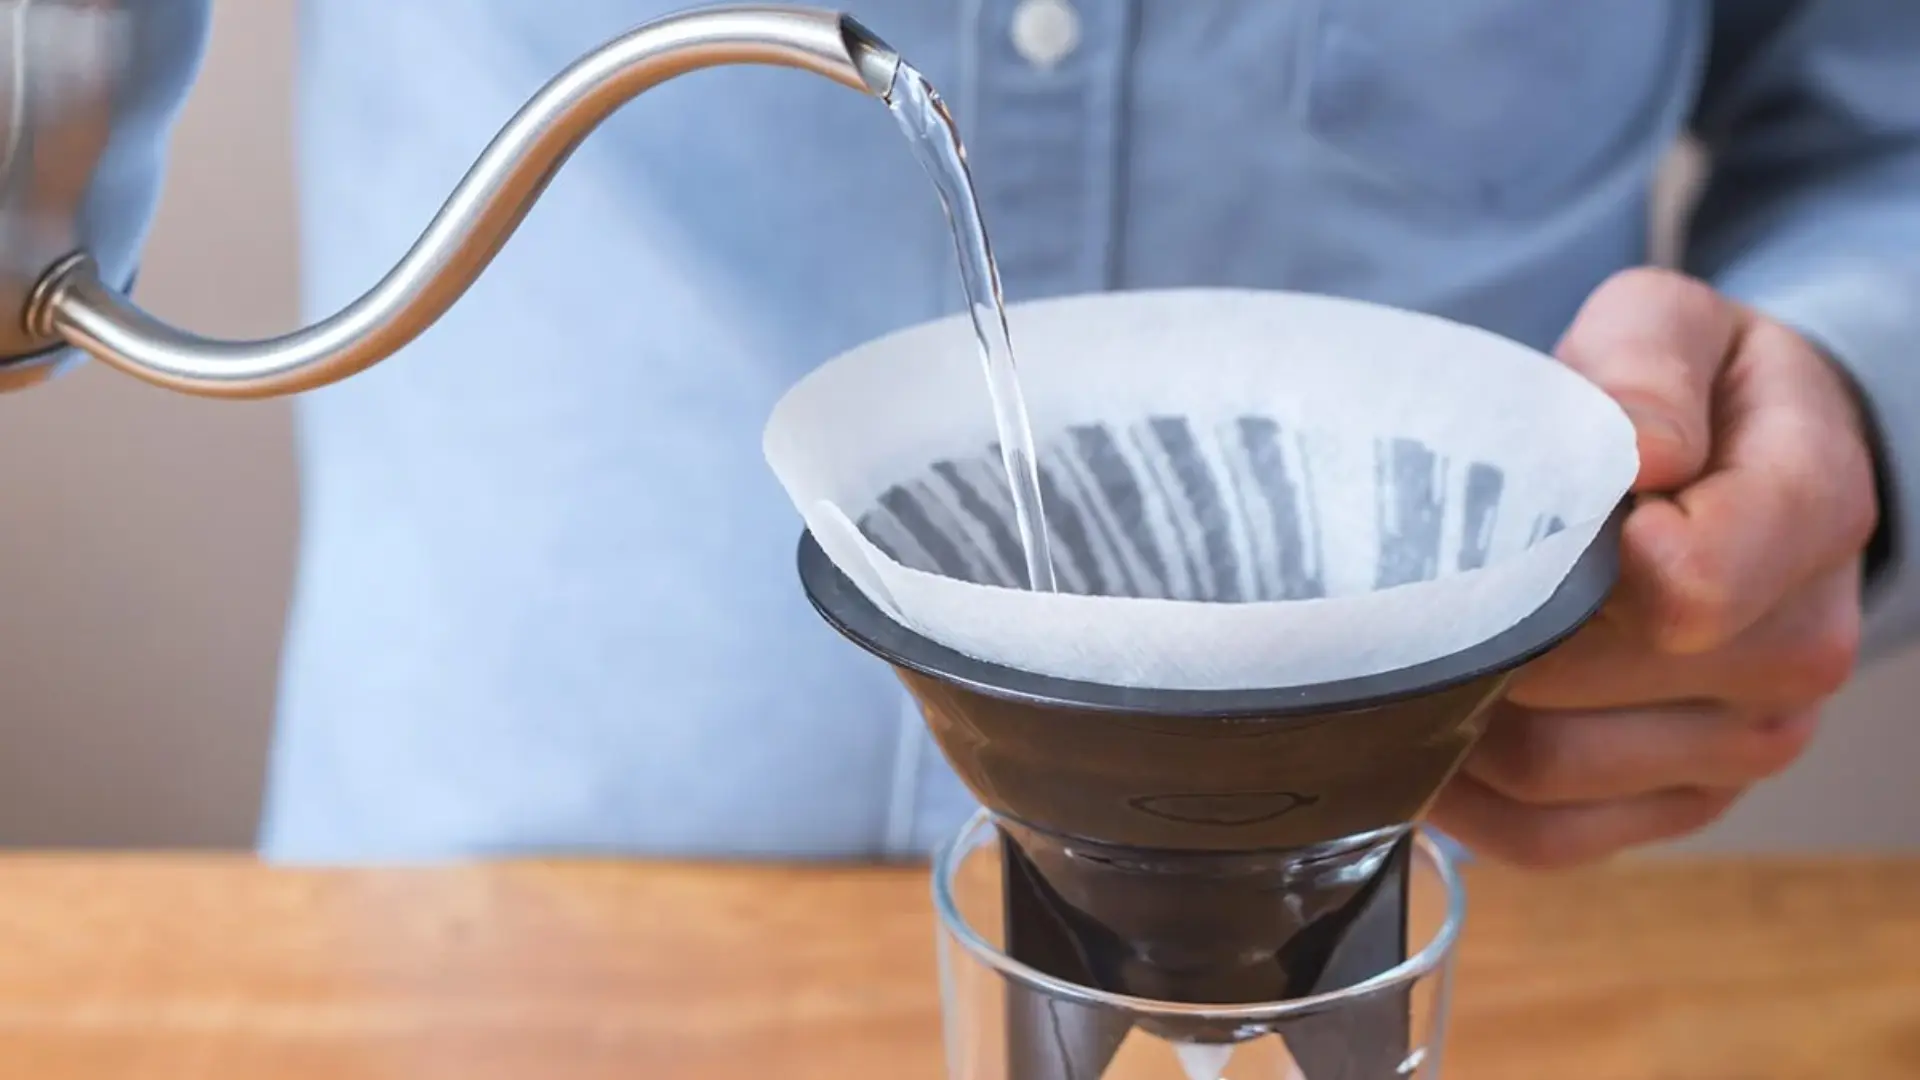 Method to Filter Water Using a Coffee Filter